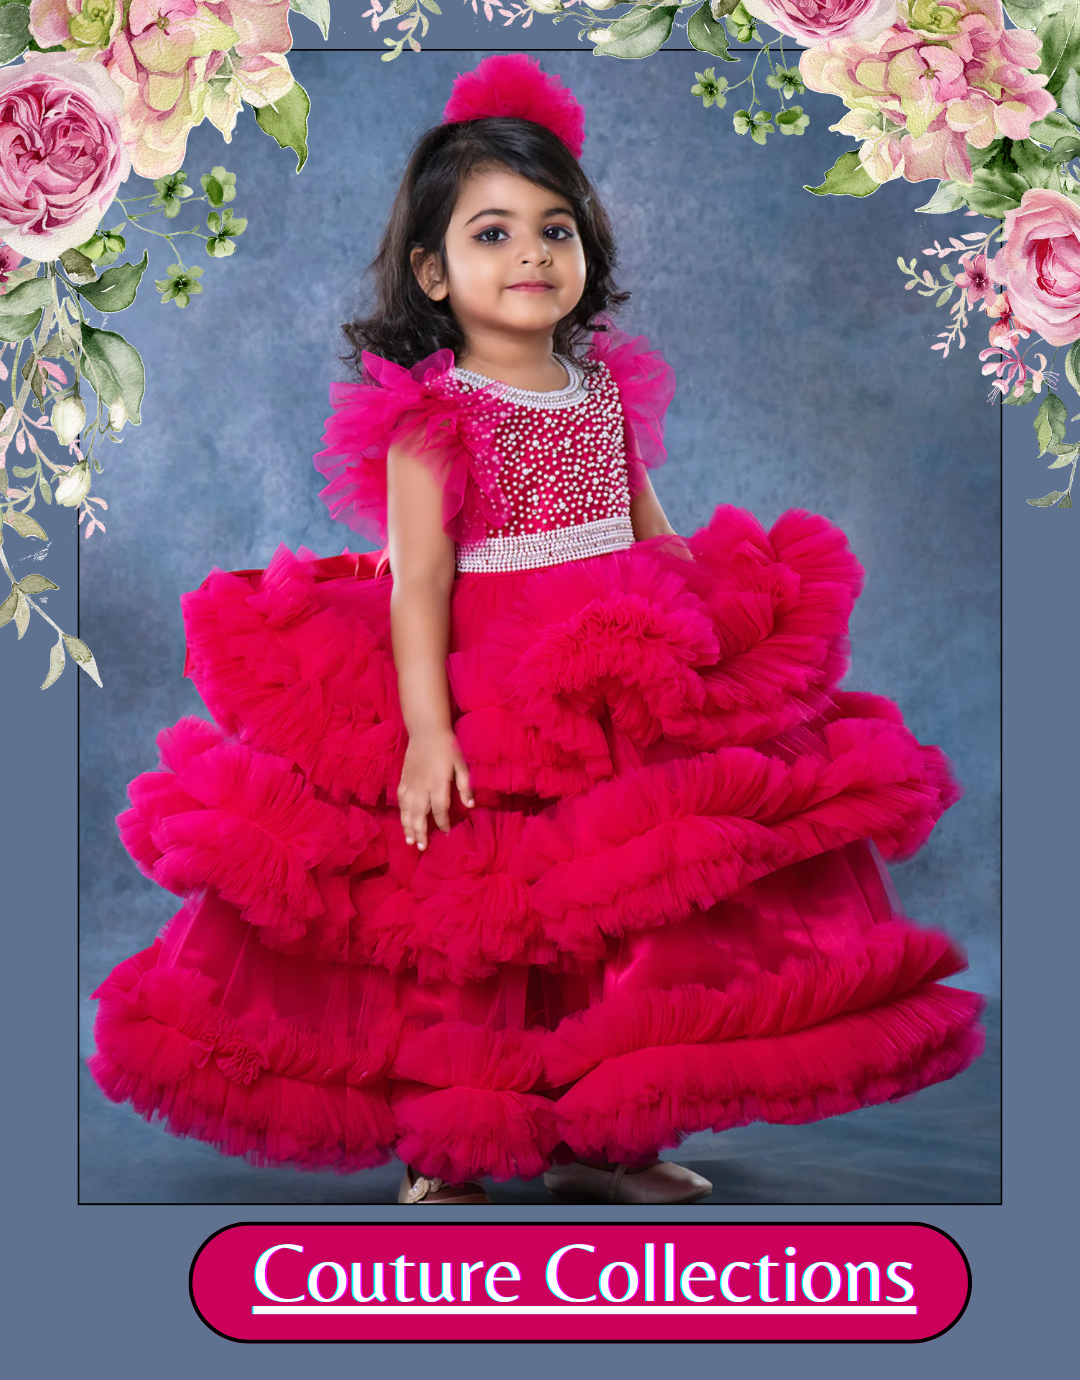 Girls Gowns - Buy Girls Gowns online at Best Prices in India | Flipkart.com